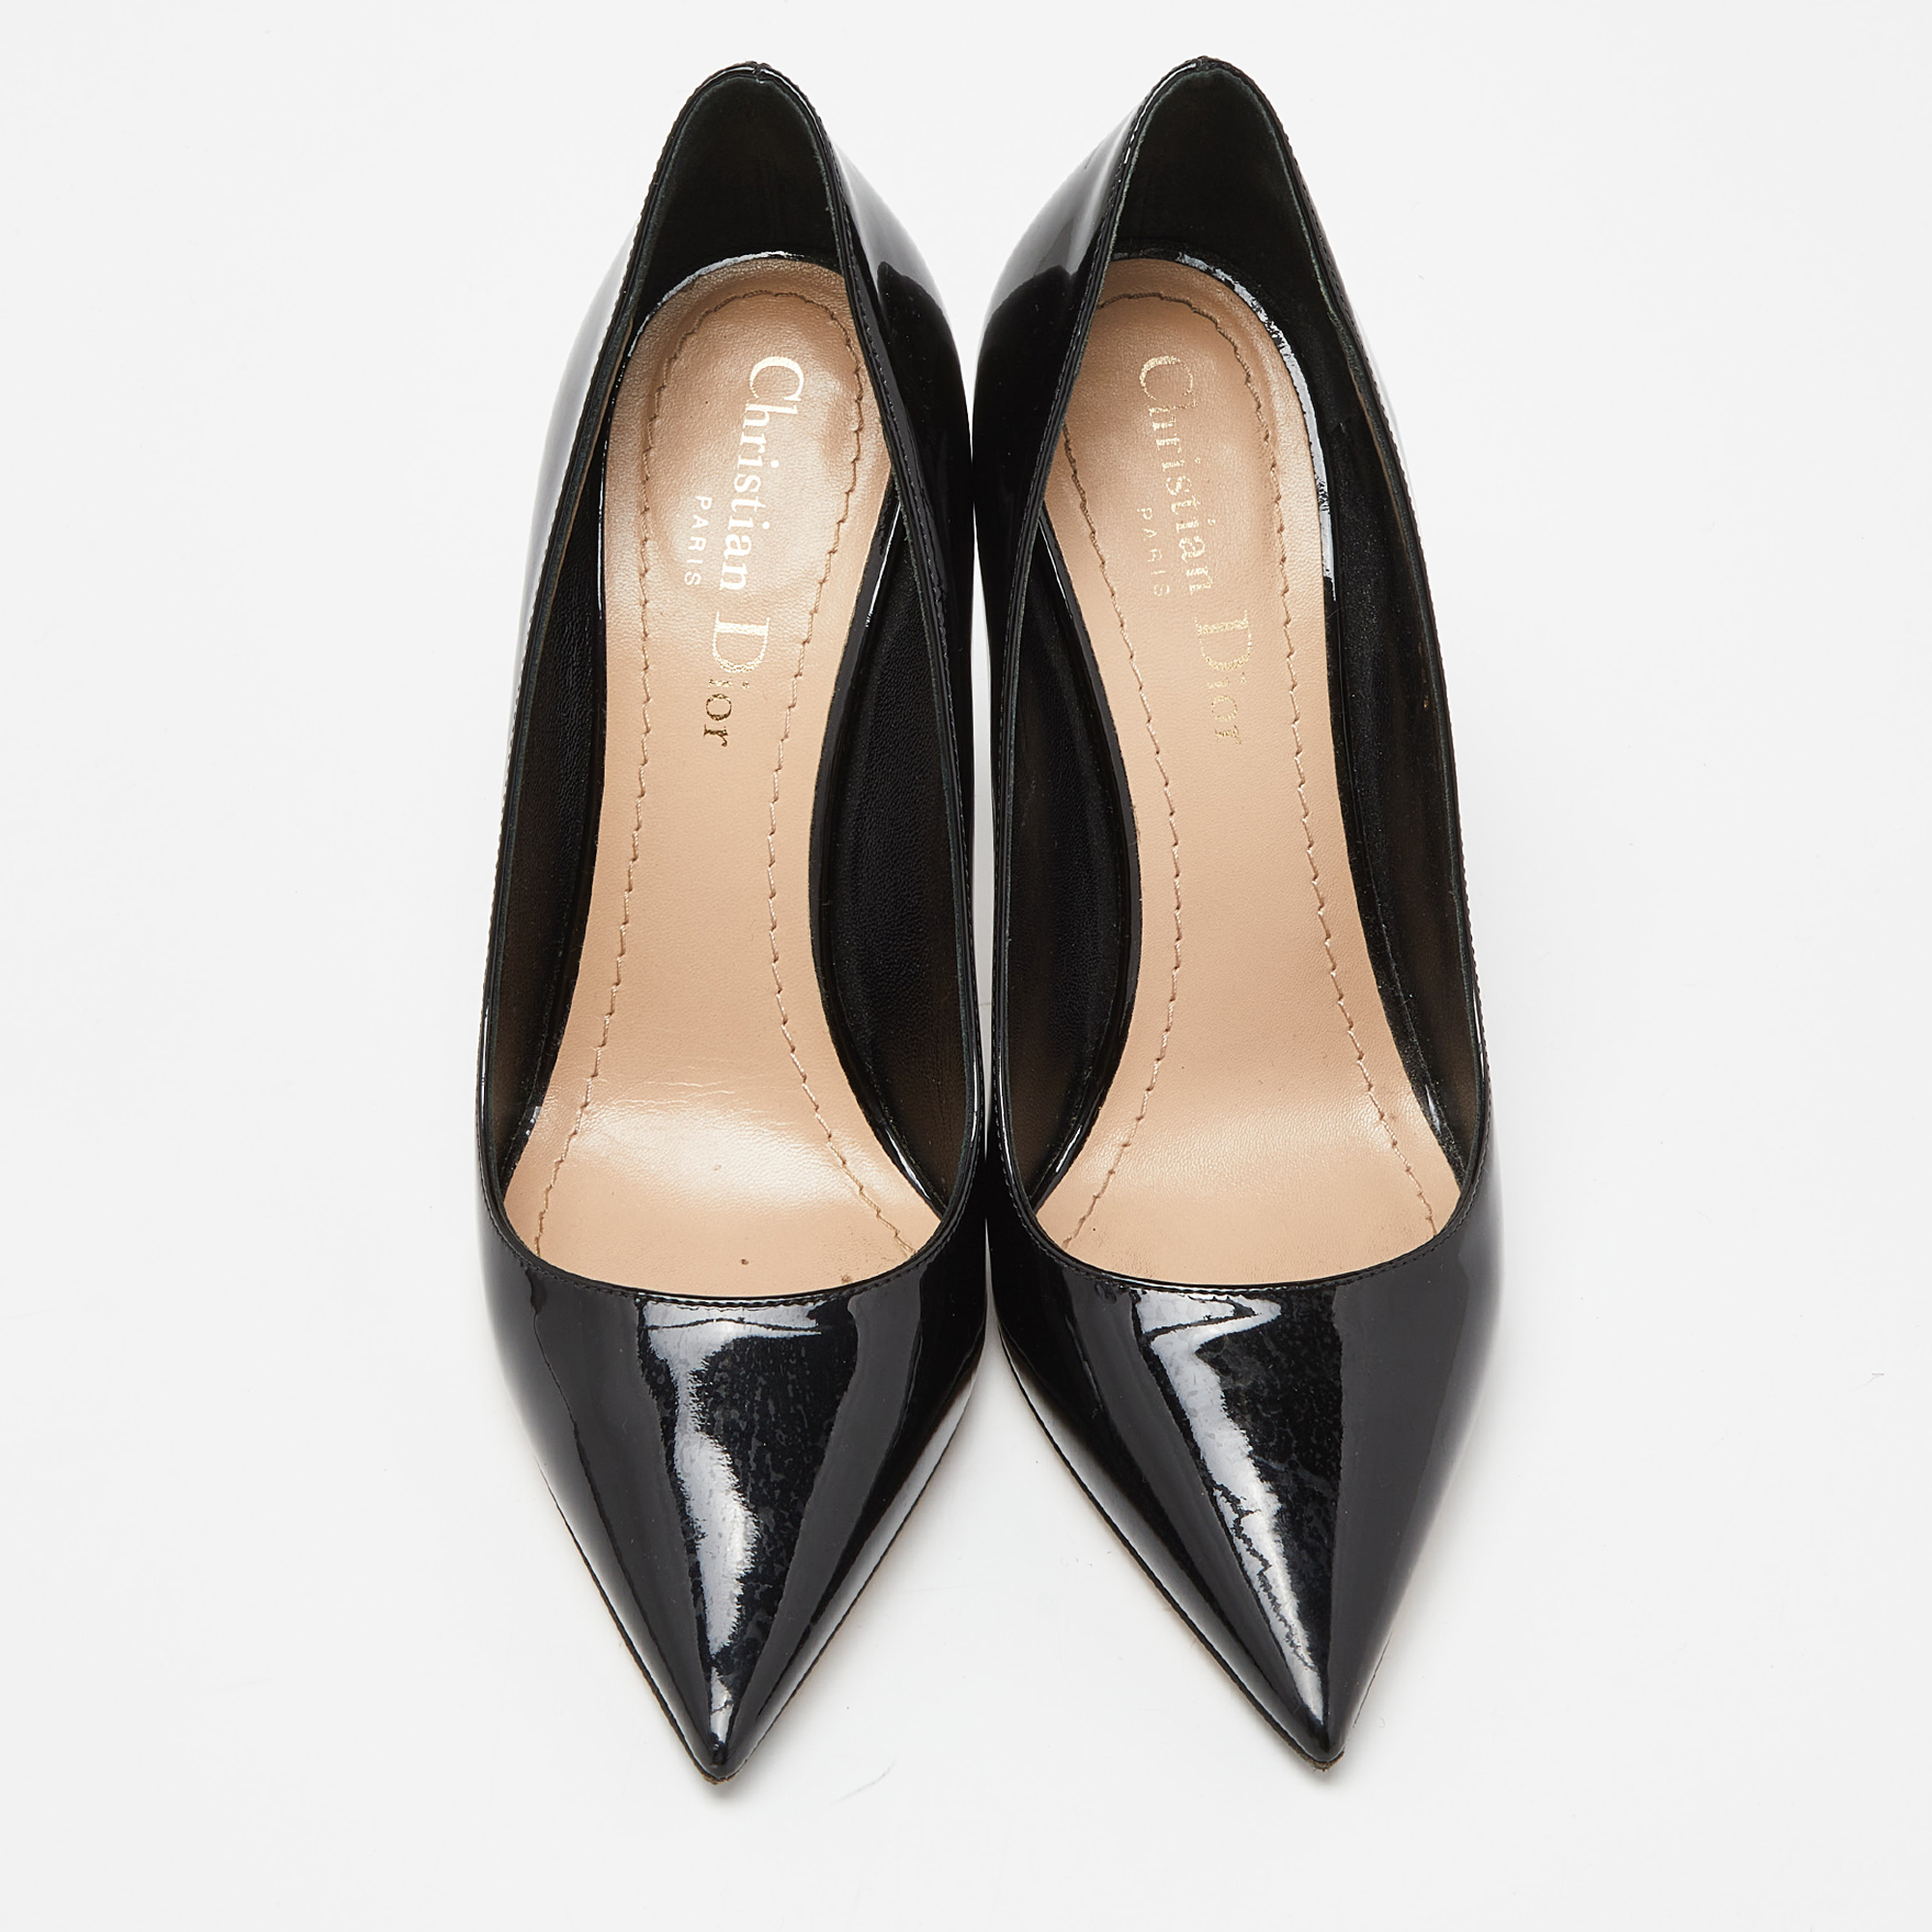 Dior Black Patent Leather Pointed Toe Pumps Size 36.5